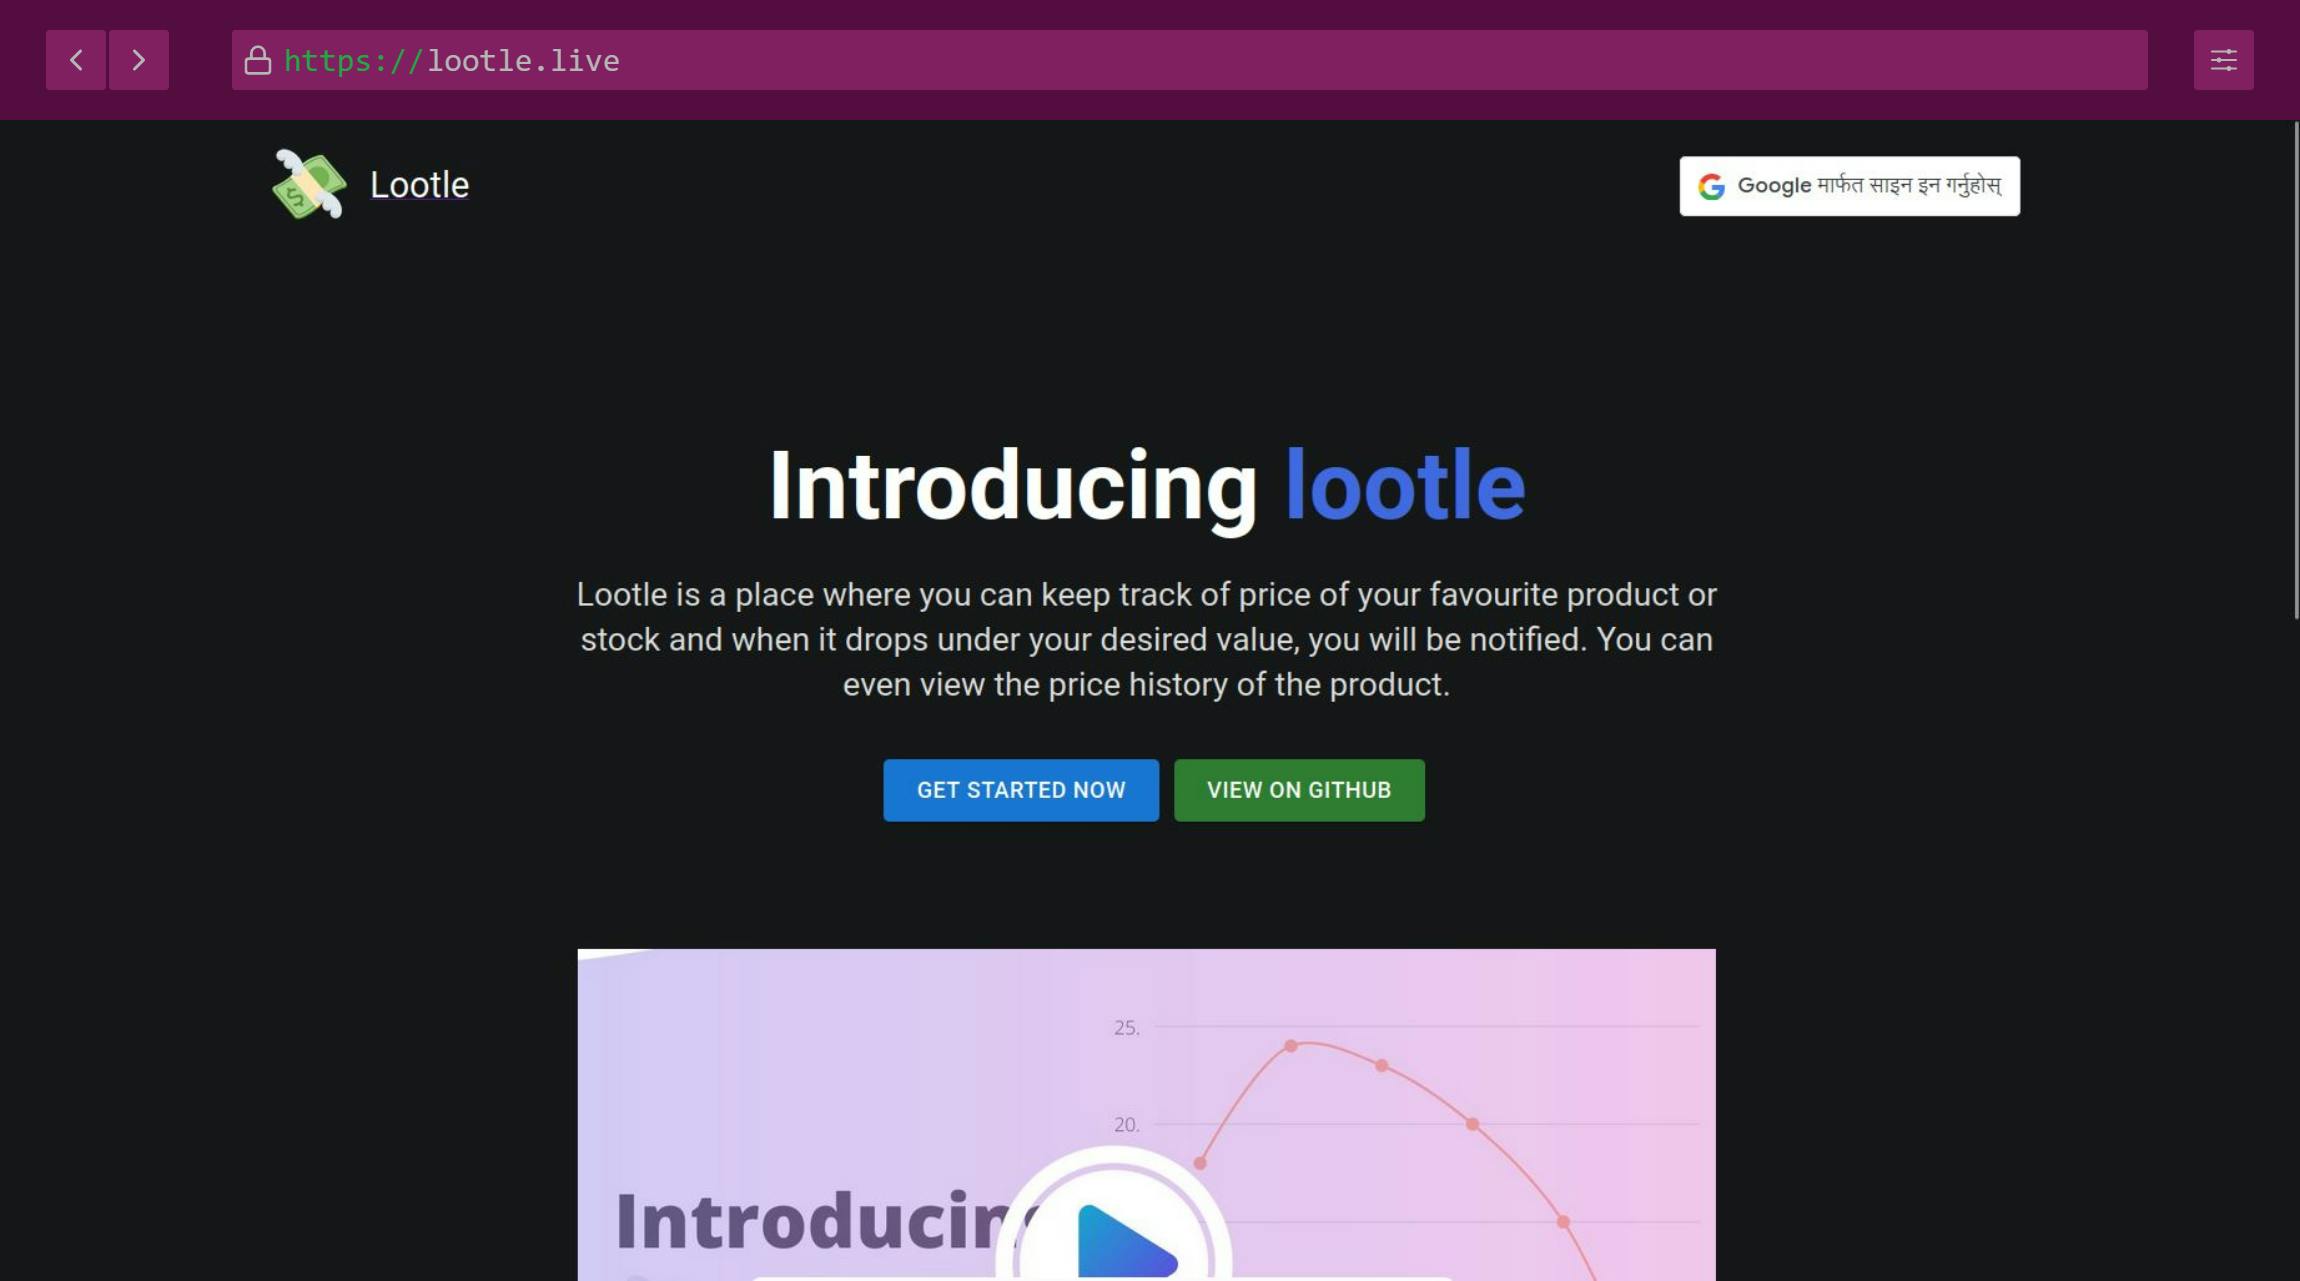 Homepage of lootle.live